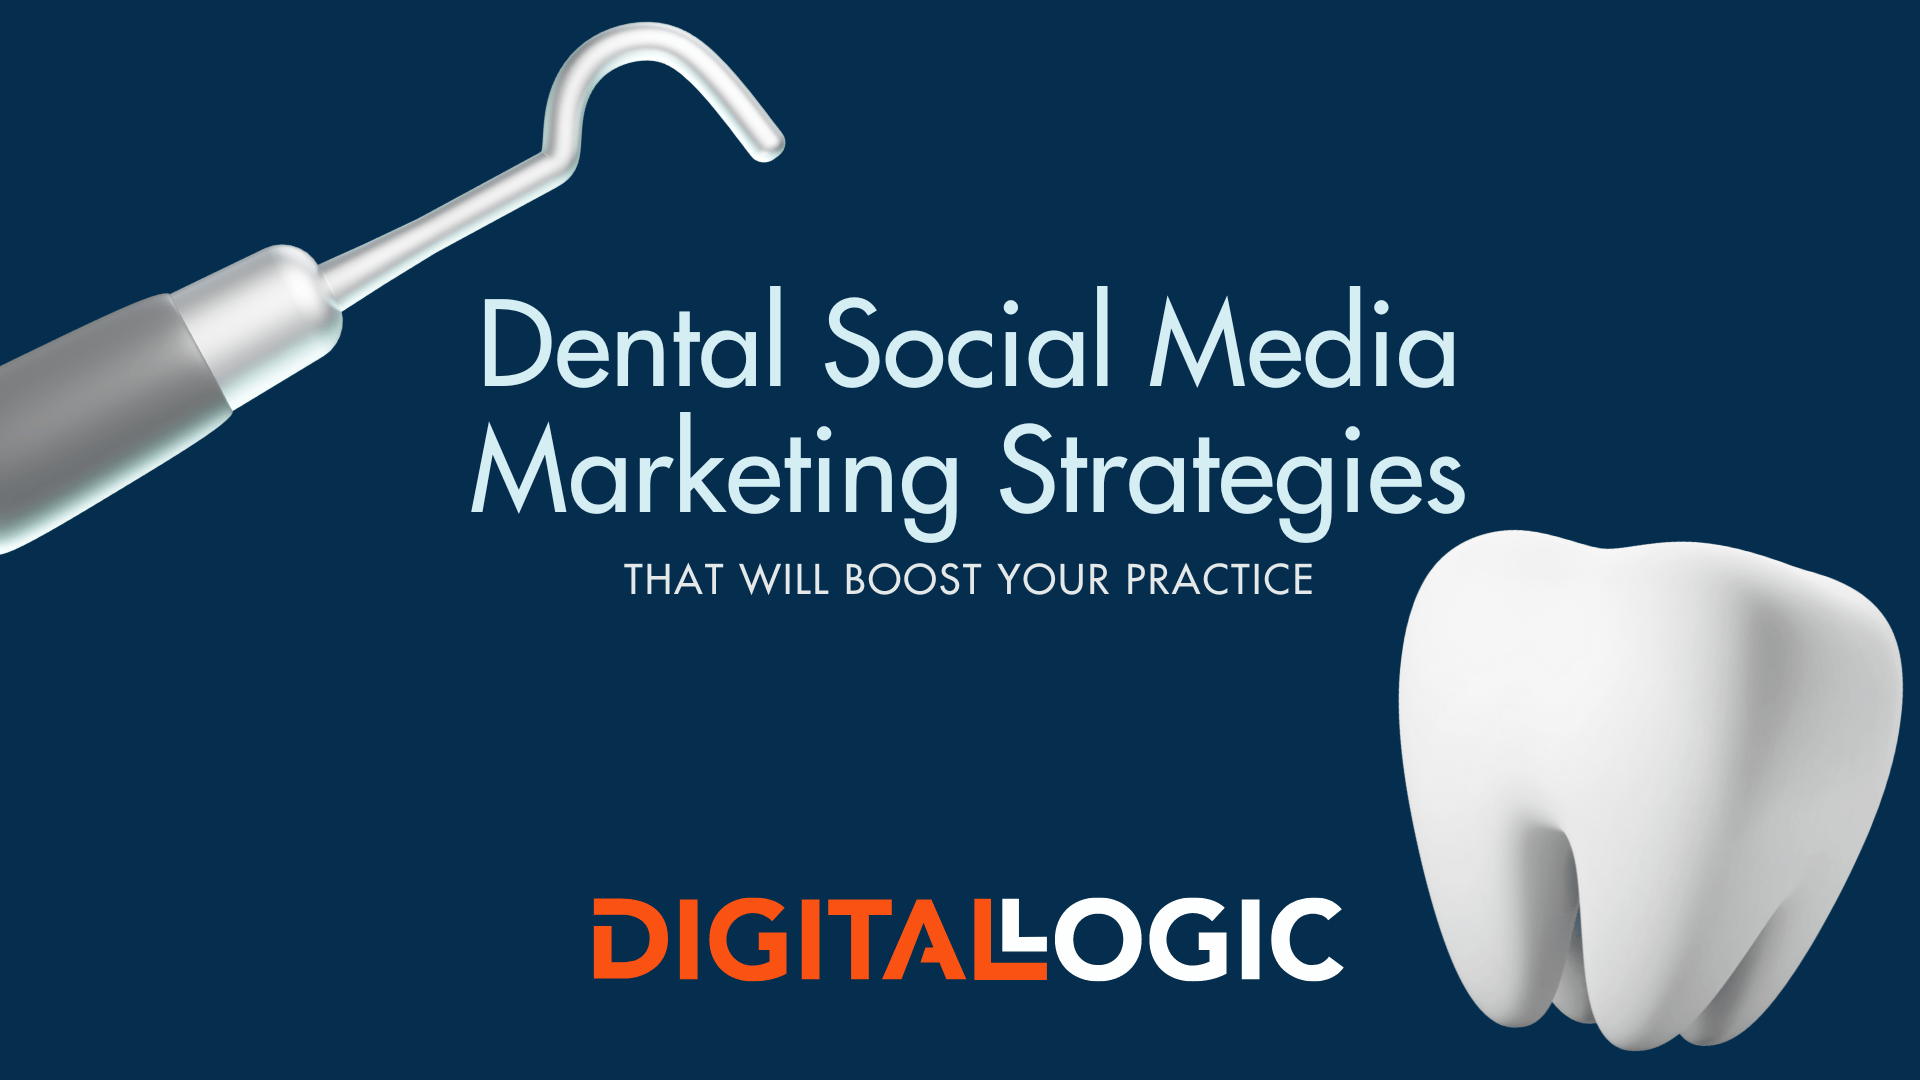 Dental Social Media Marketing Strategies That Will Boost Your Practice